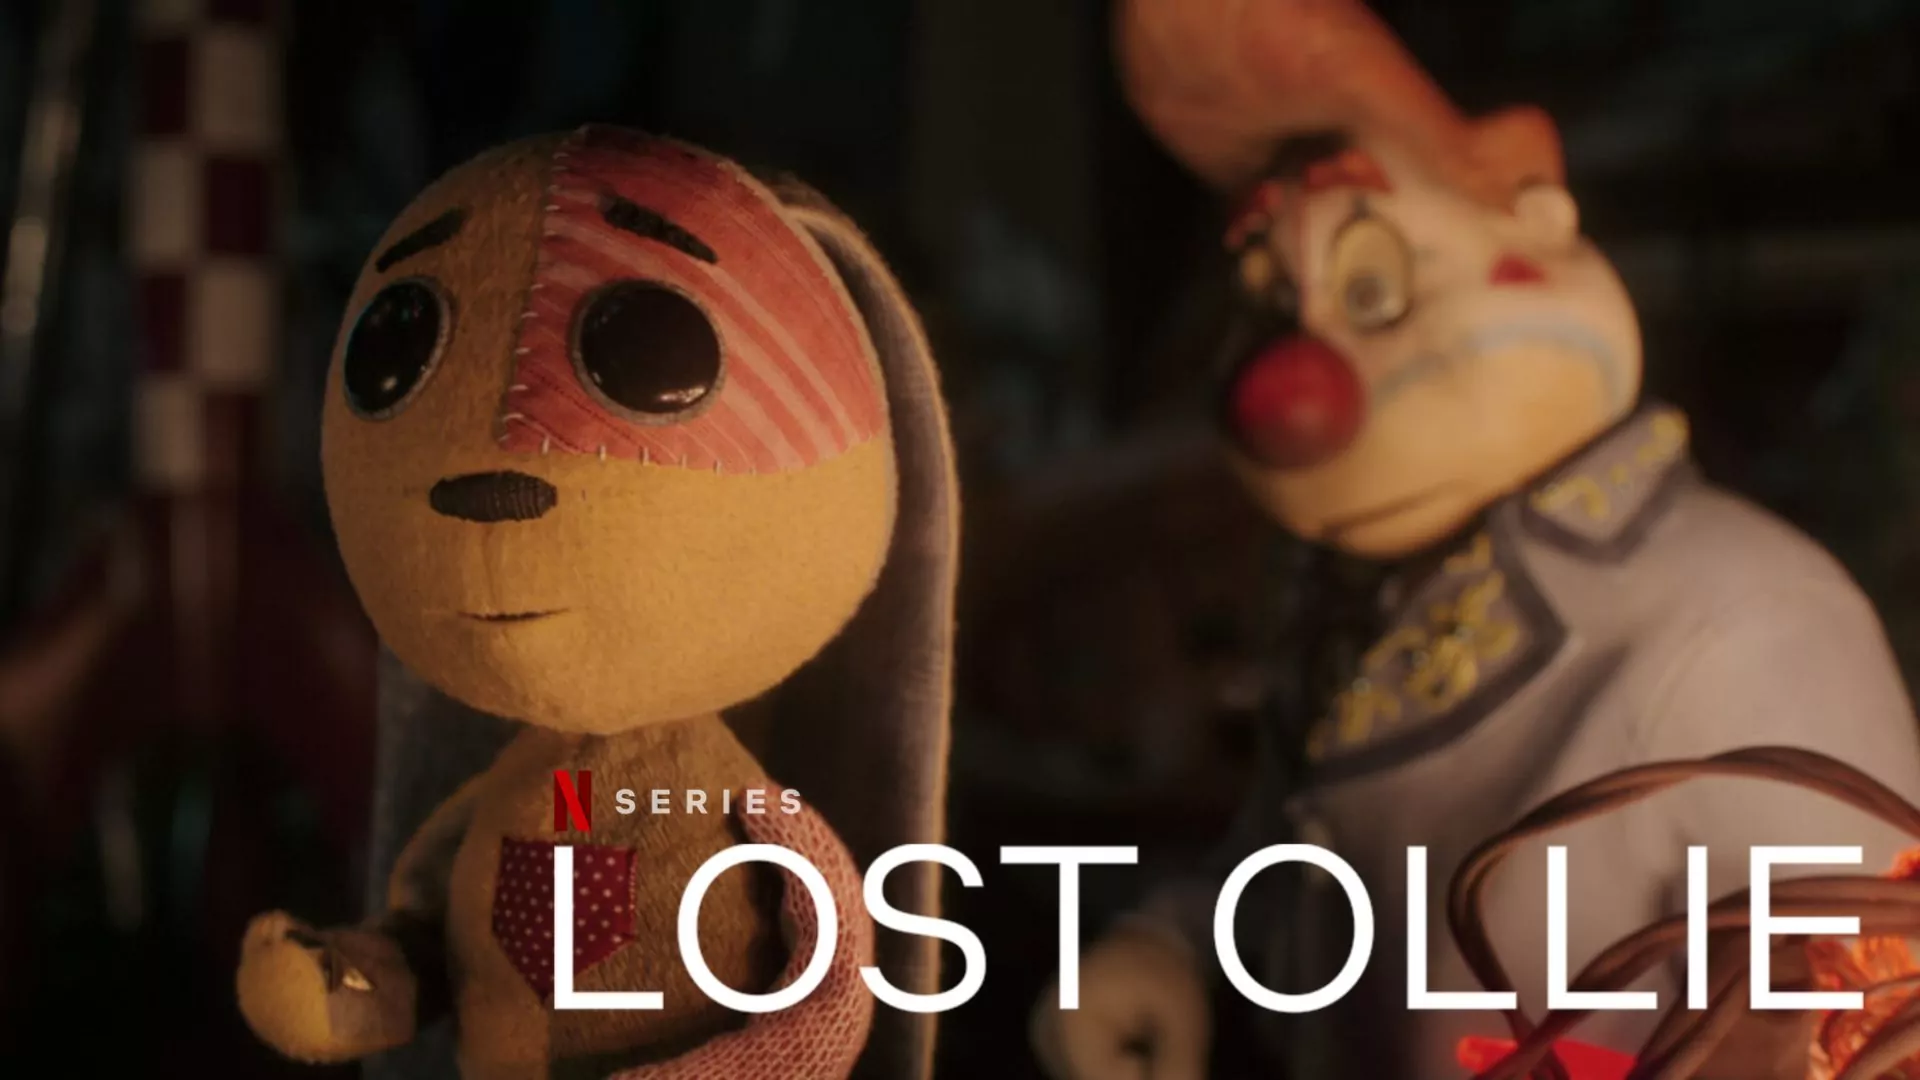 Lost ollie Parents Guide Age Rating